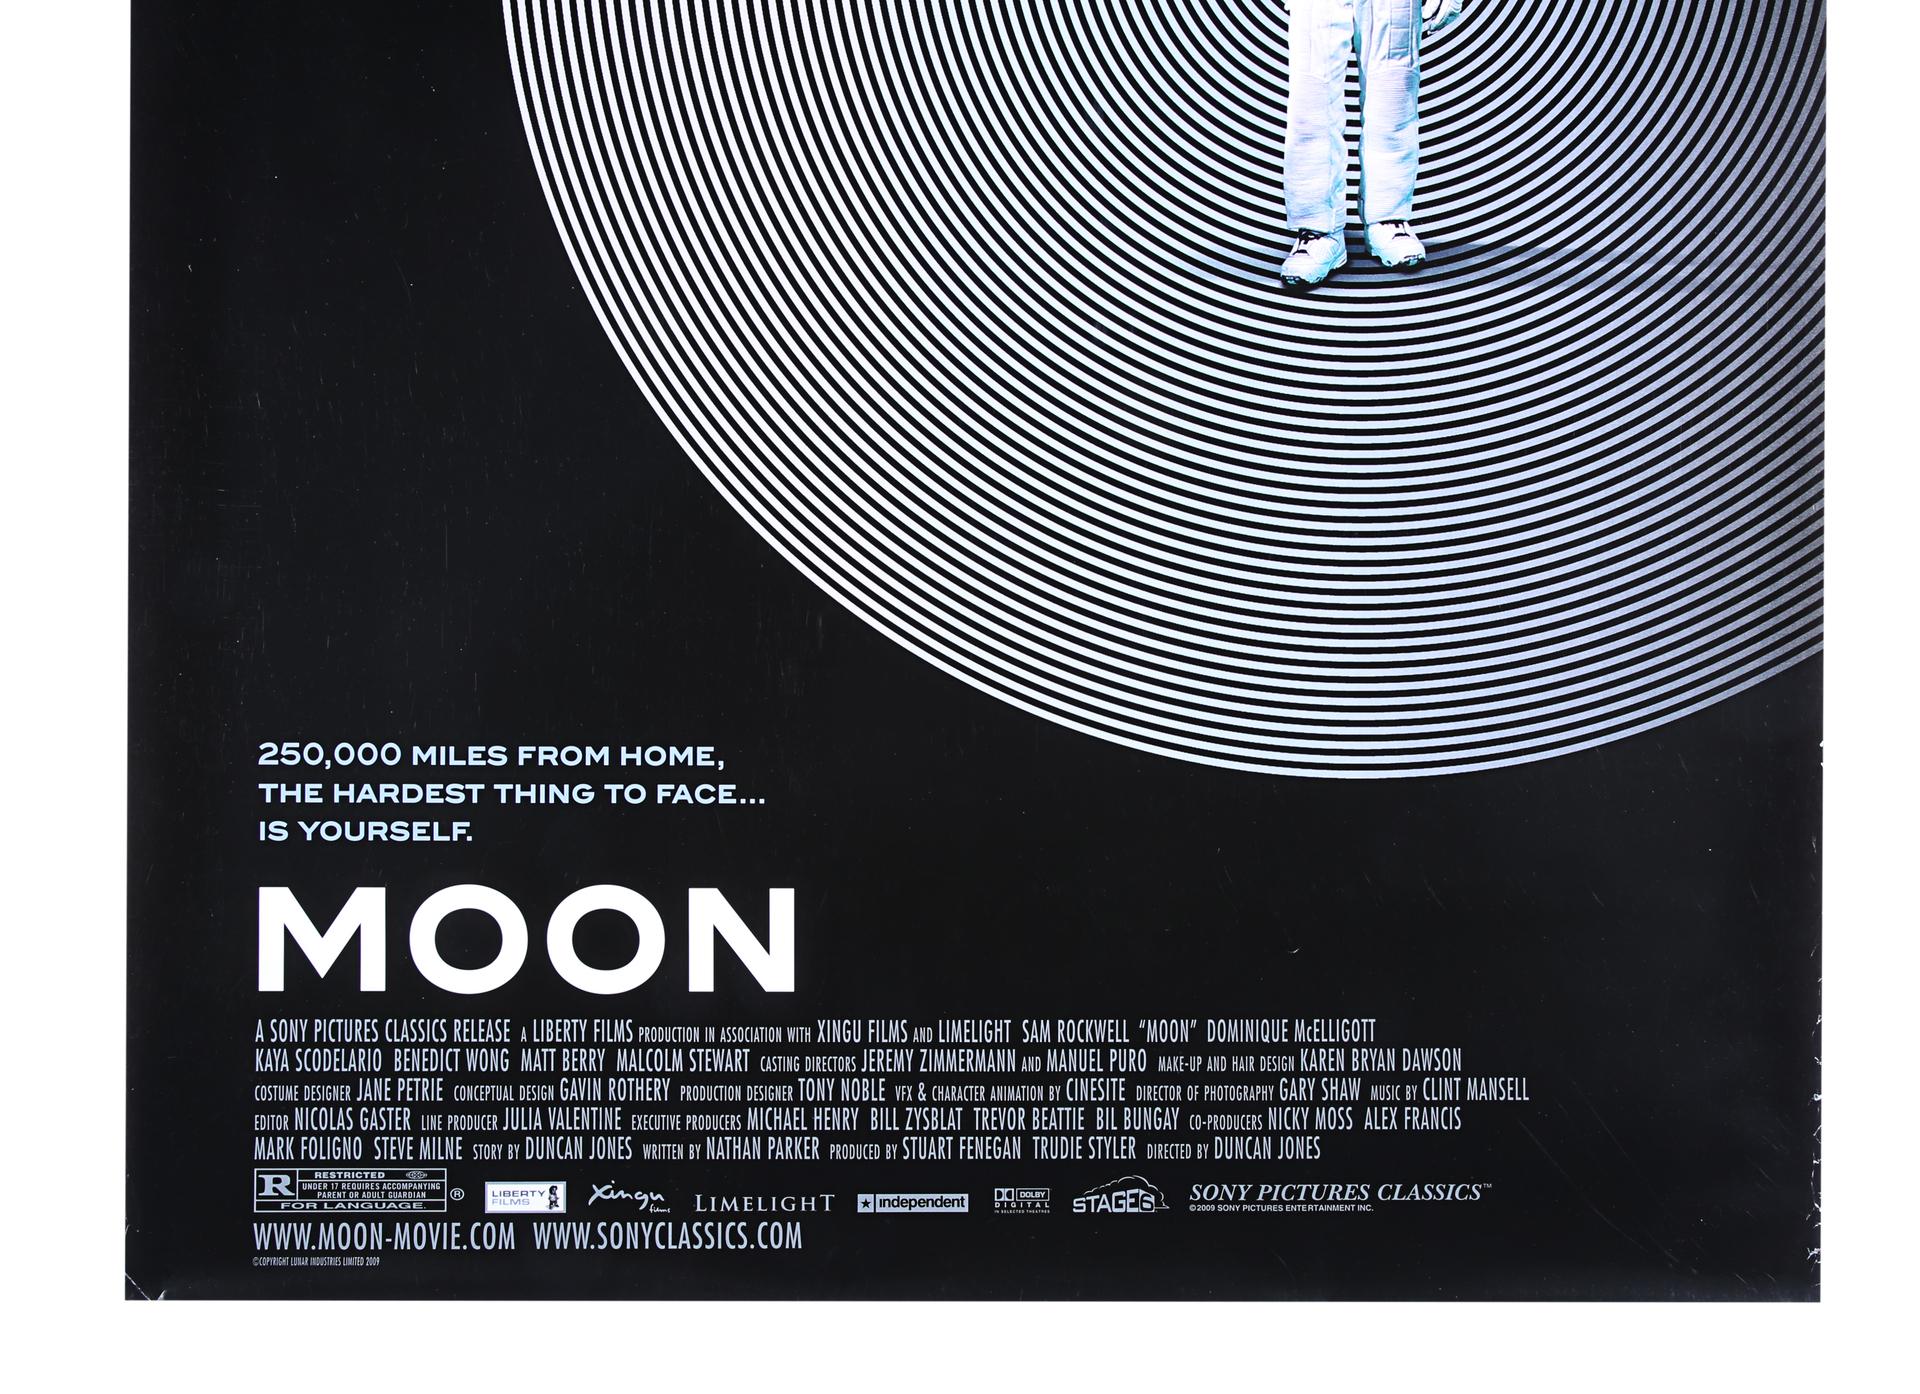 Lot #785 - MOON (2009) - Sam Rockwell Autographed One-sheet Poster - 4